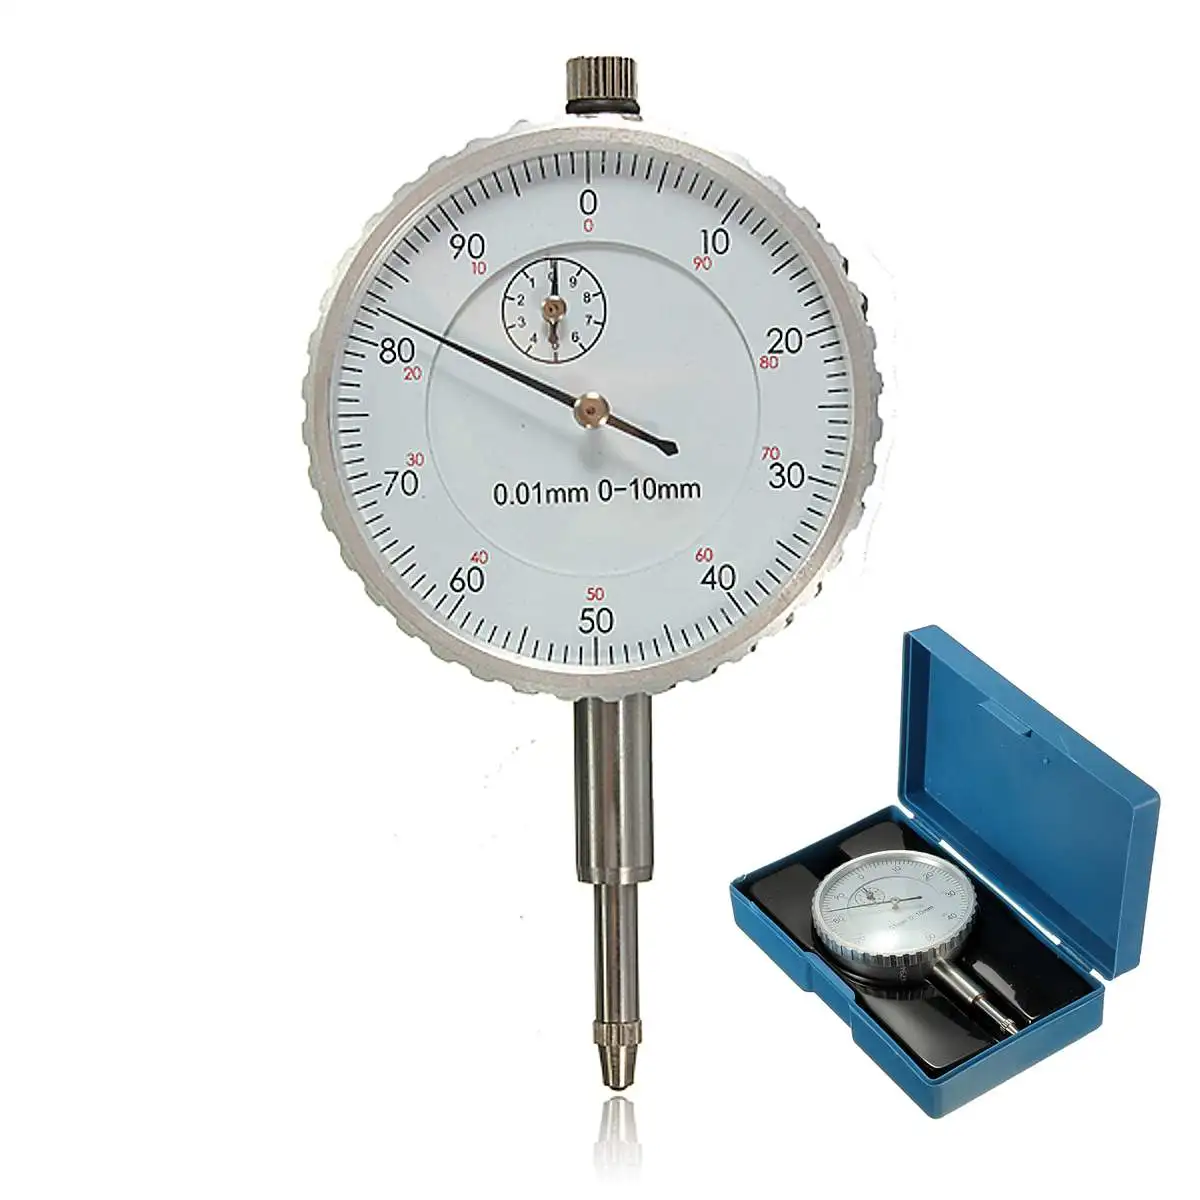 

Dial Indicator Gauge 0-10mm Meter Precise 0.01 Resolution Concentricity Test Dial Bore Gauge Precision Comparator Measuring Tool